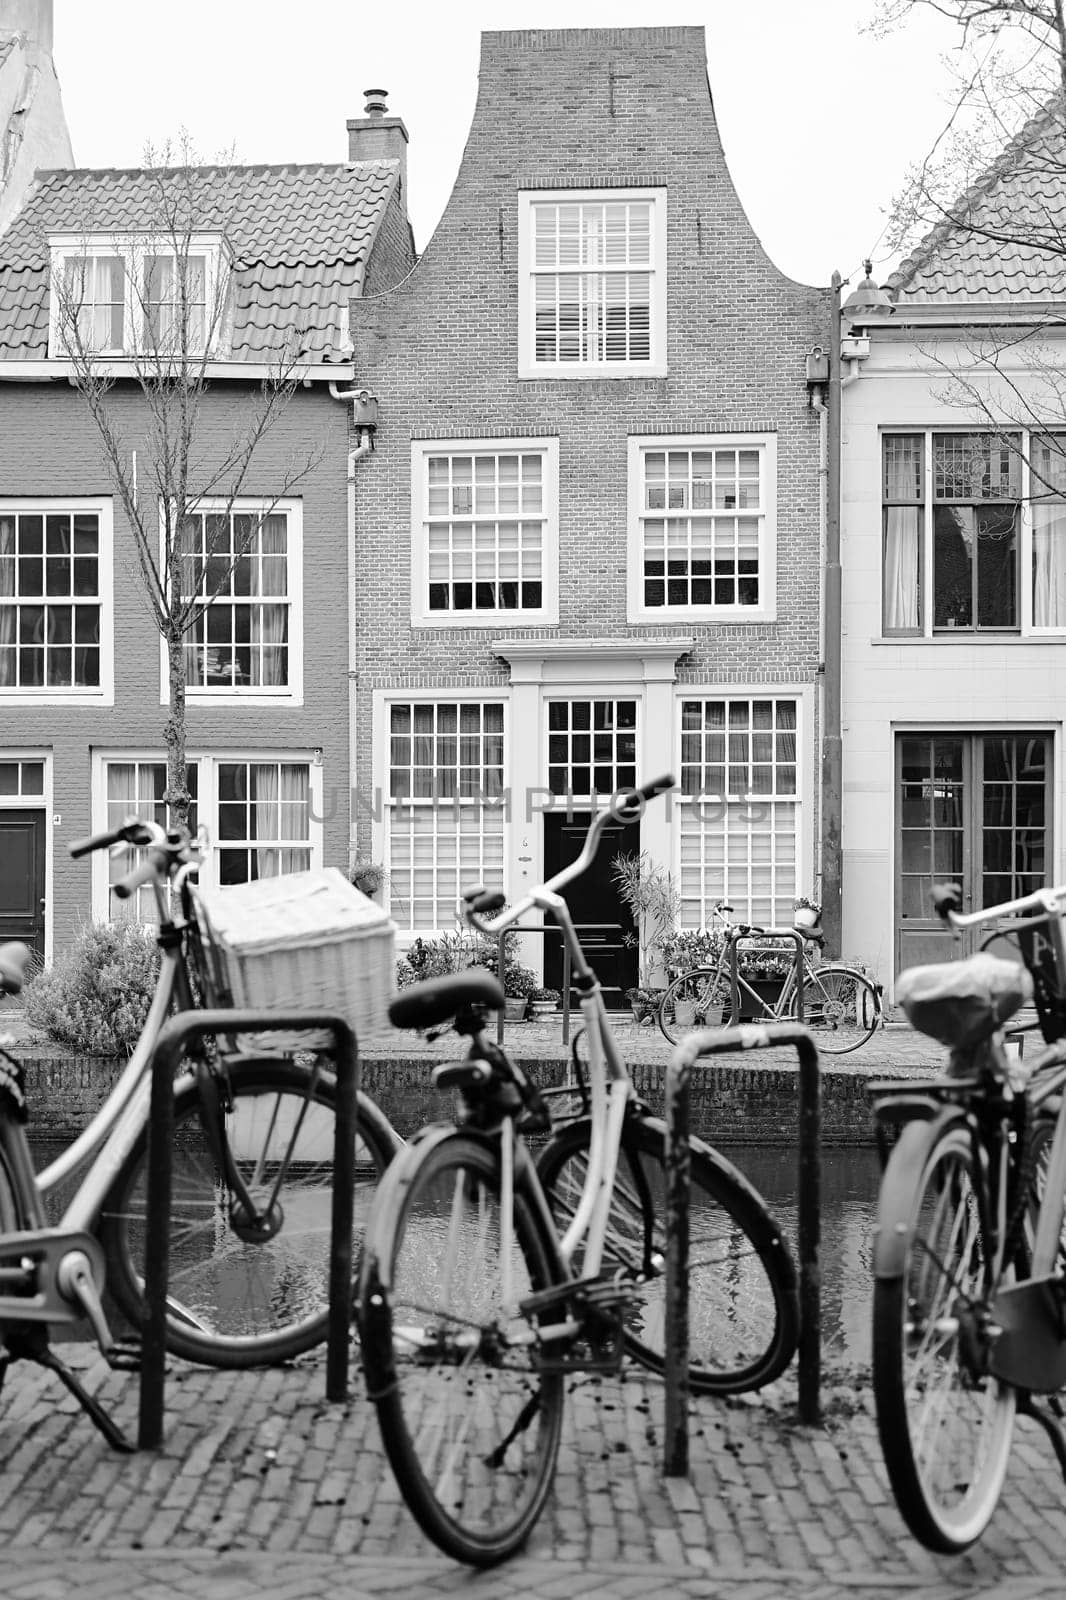 Picturesque Netherlands in black and white. Bicycles parked alongside a channel on beautiful old buildings background. by berezko